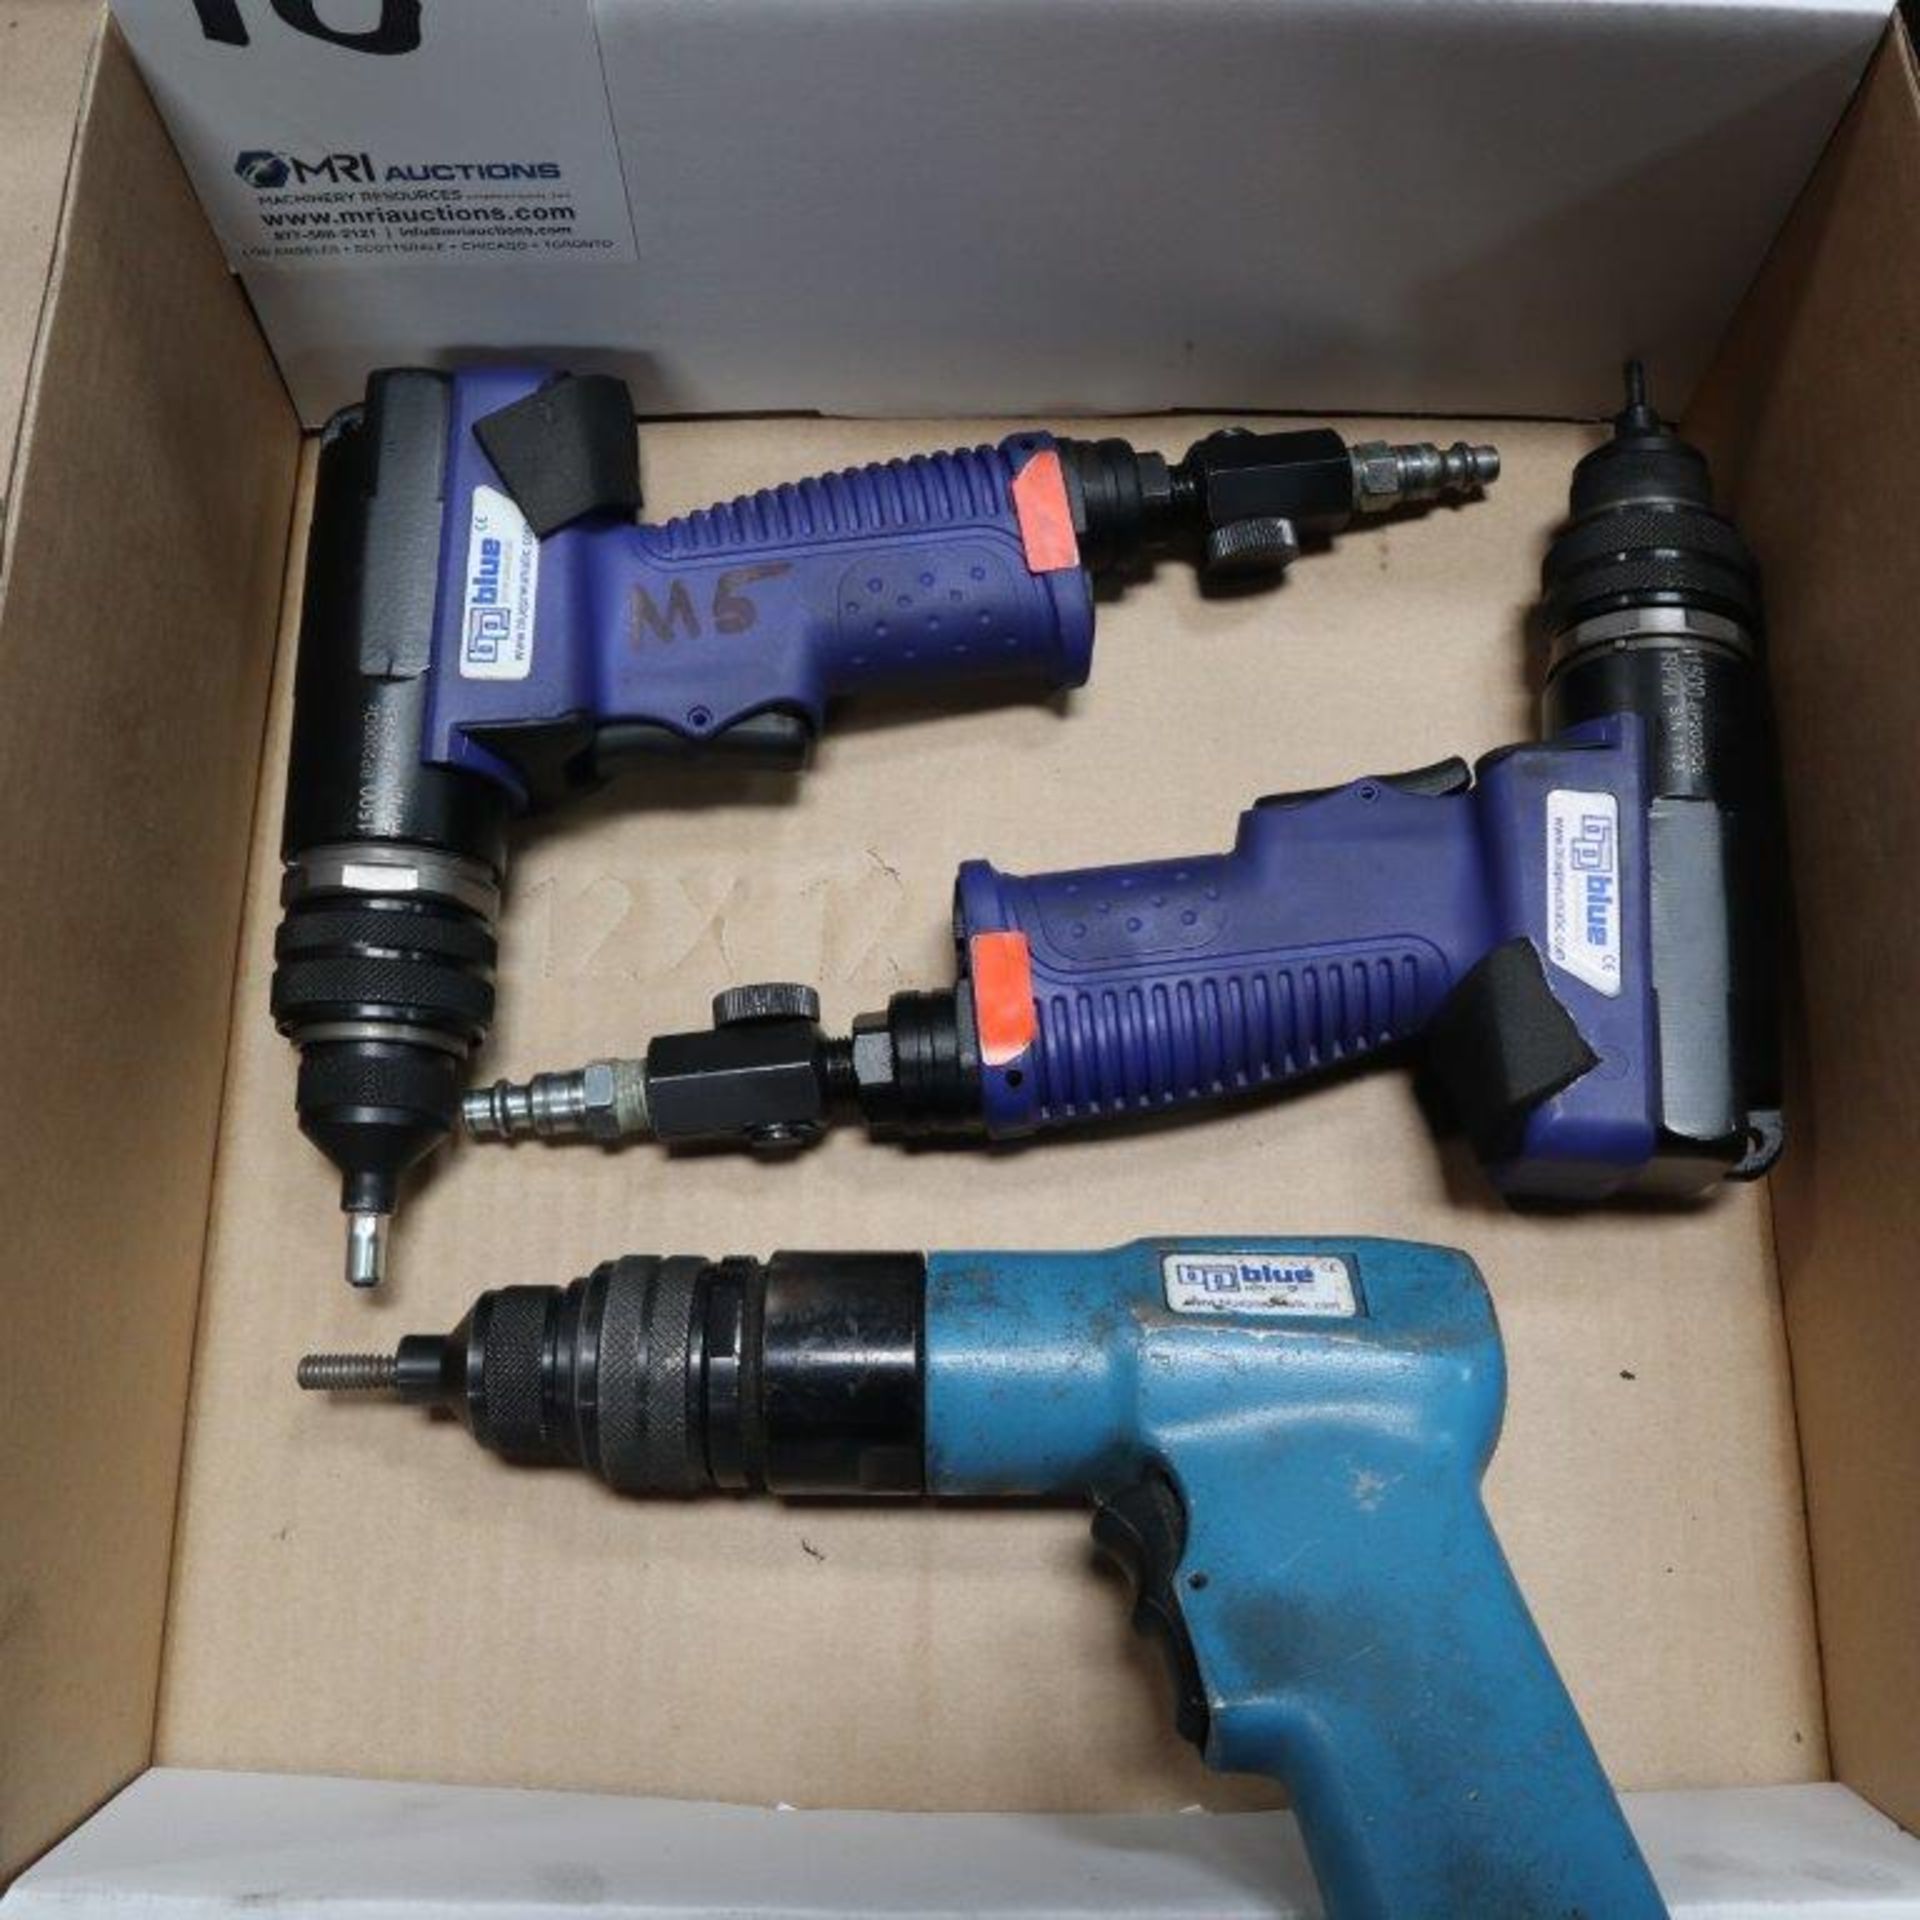 LOT TO INCLUDE: (1) BP BLUE SPIN RIVET NUT TOOL (2) BP BLUE PNEUMATIC QUICK SPIN RIVET NUT TOOL, - Image 3 of 4